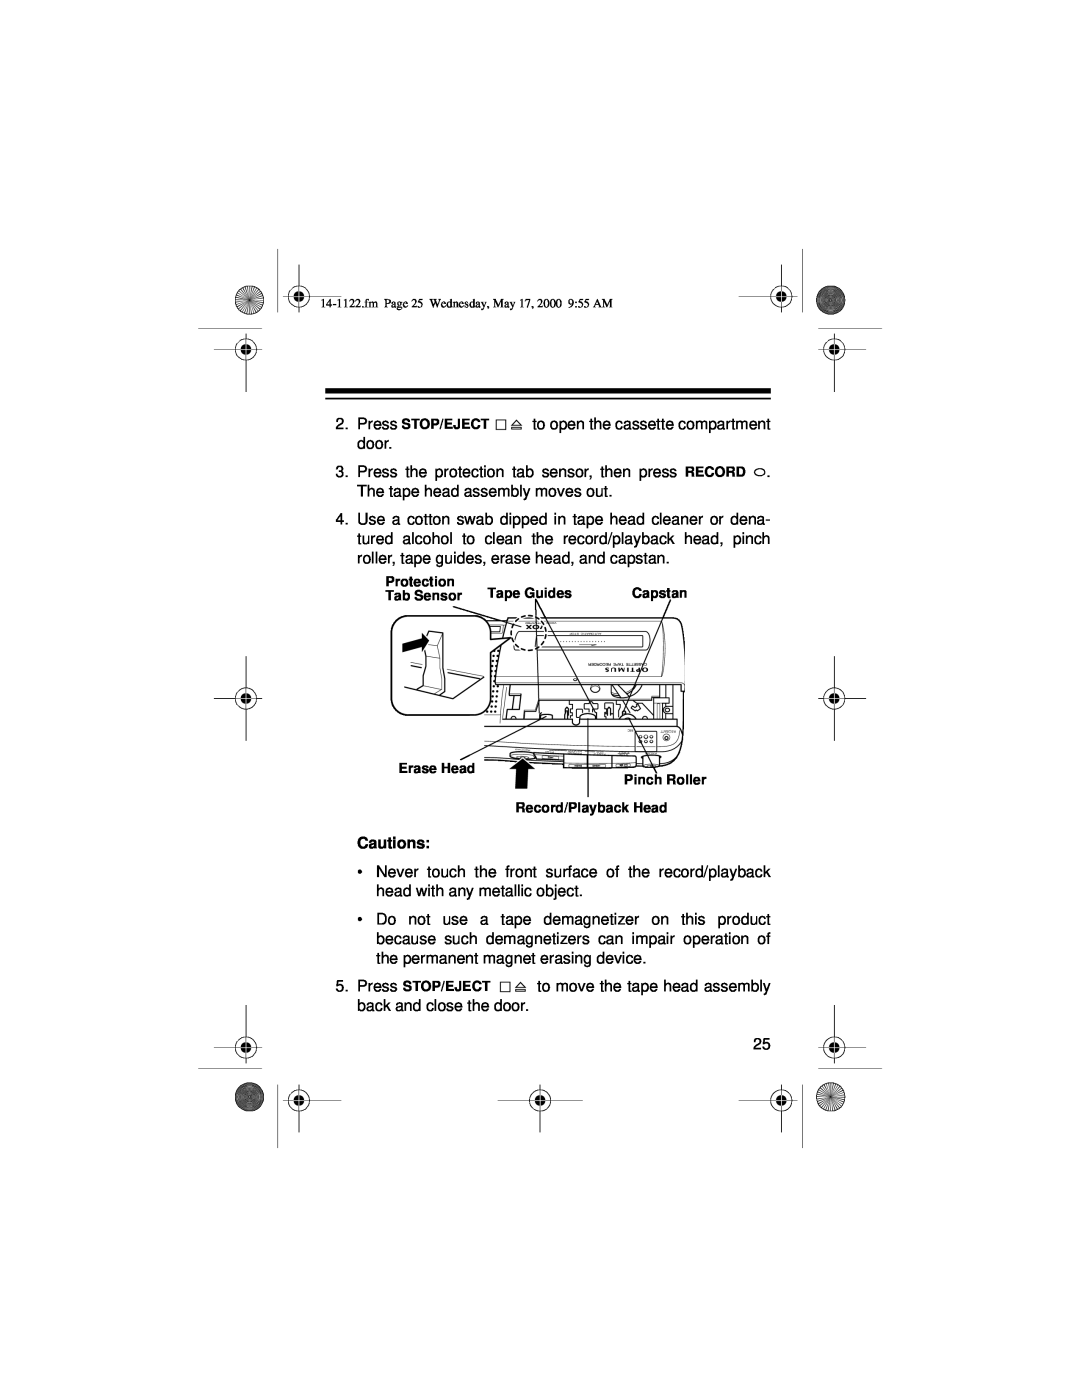 Optimus CTR-116 owner manual to open the cassette compartment, Cautions 